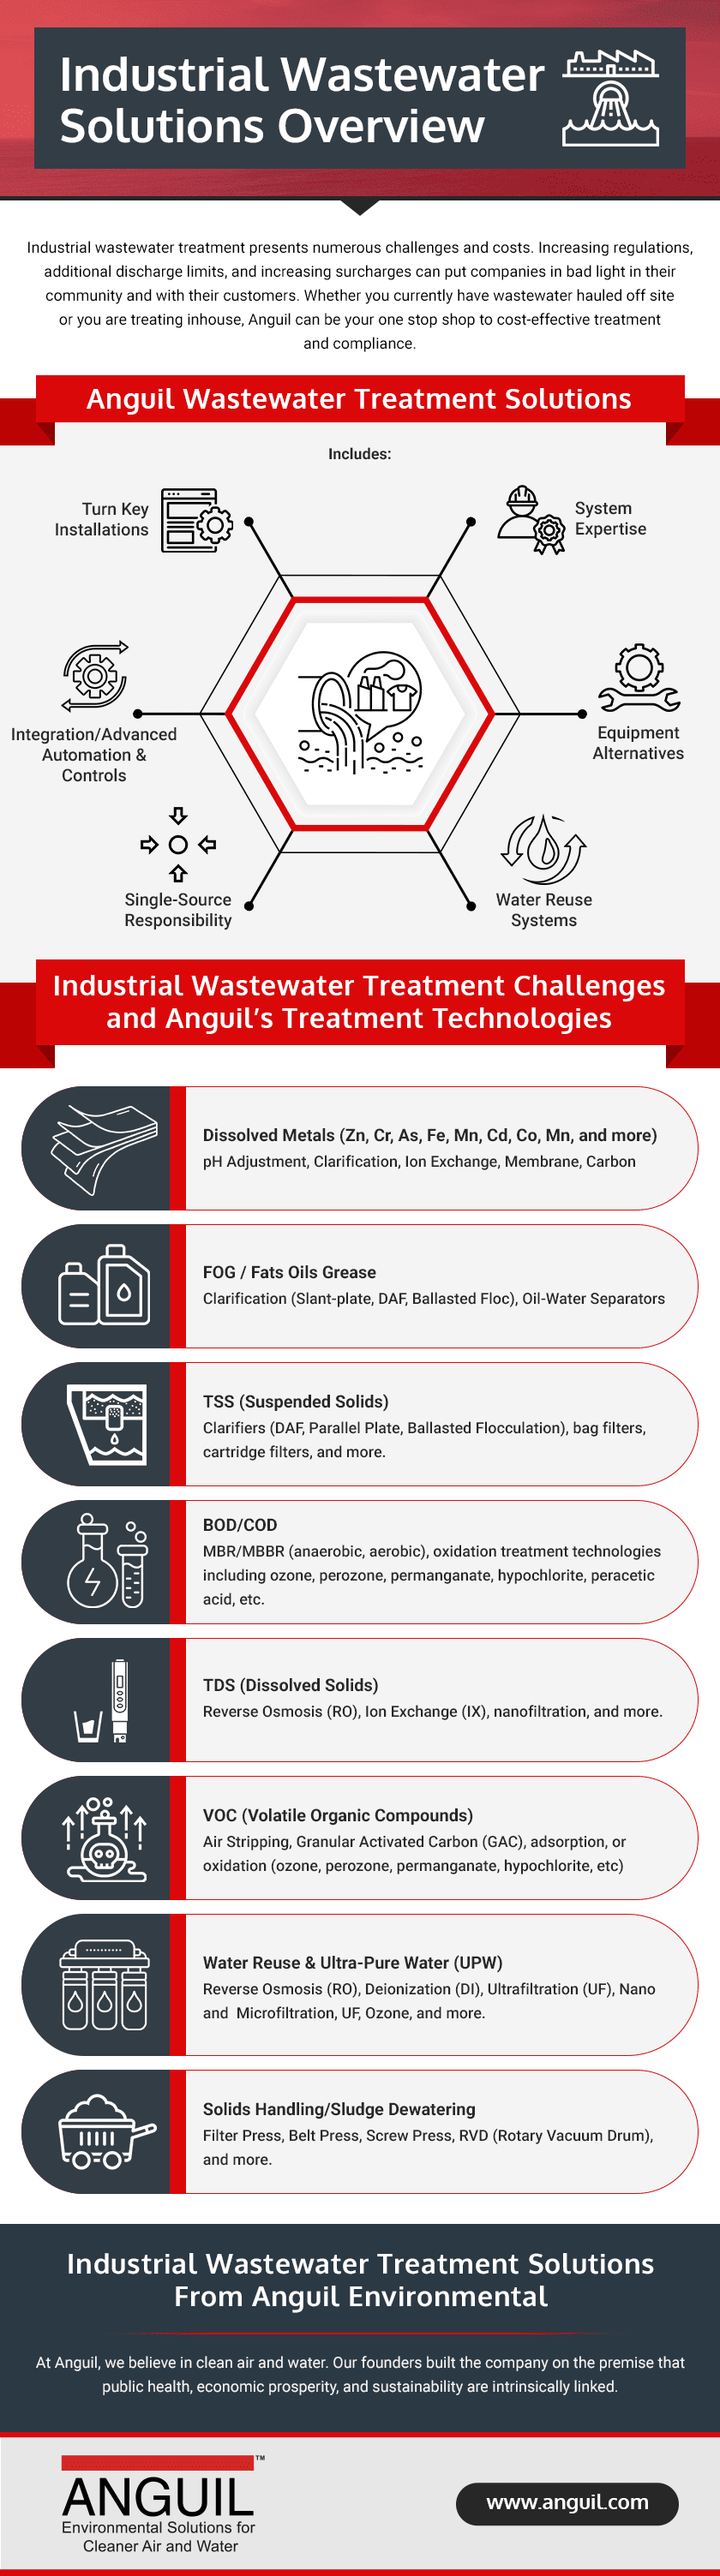 Industrial Wastewater Solutions Overview